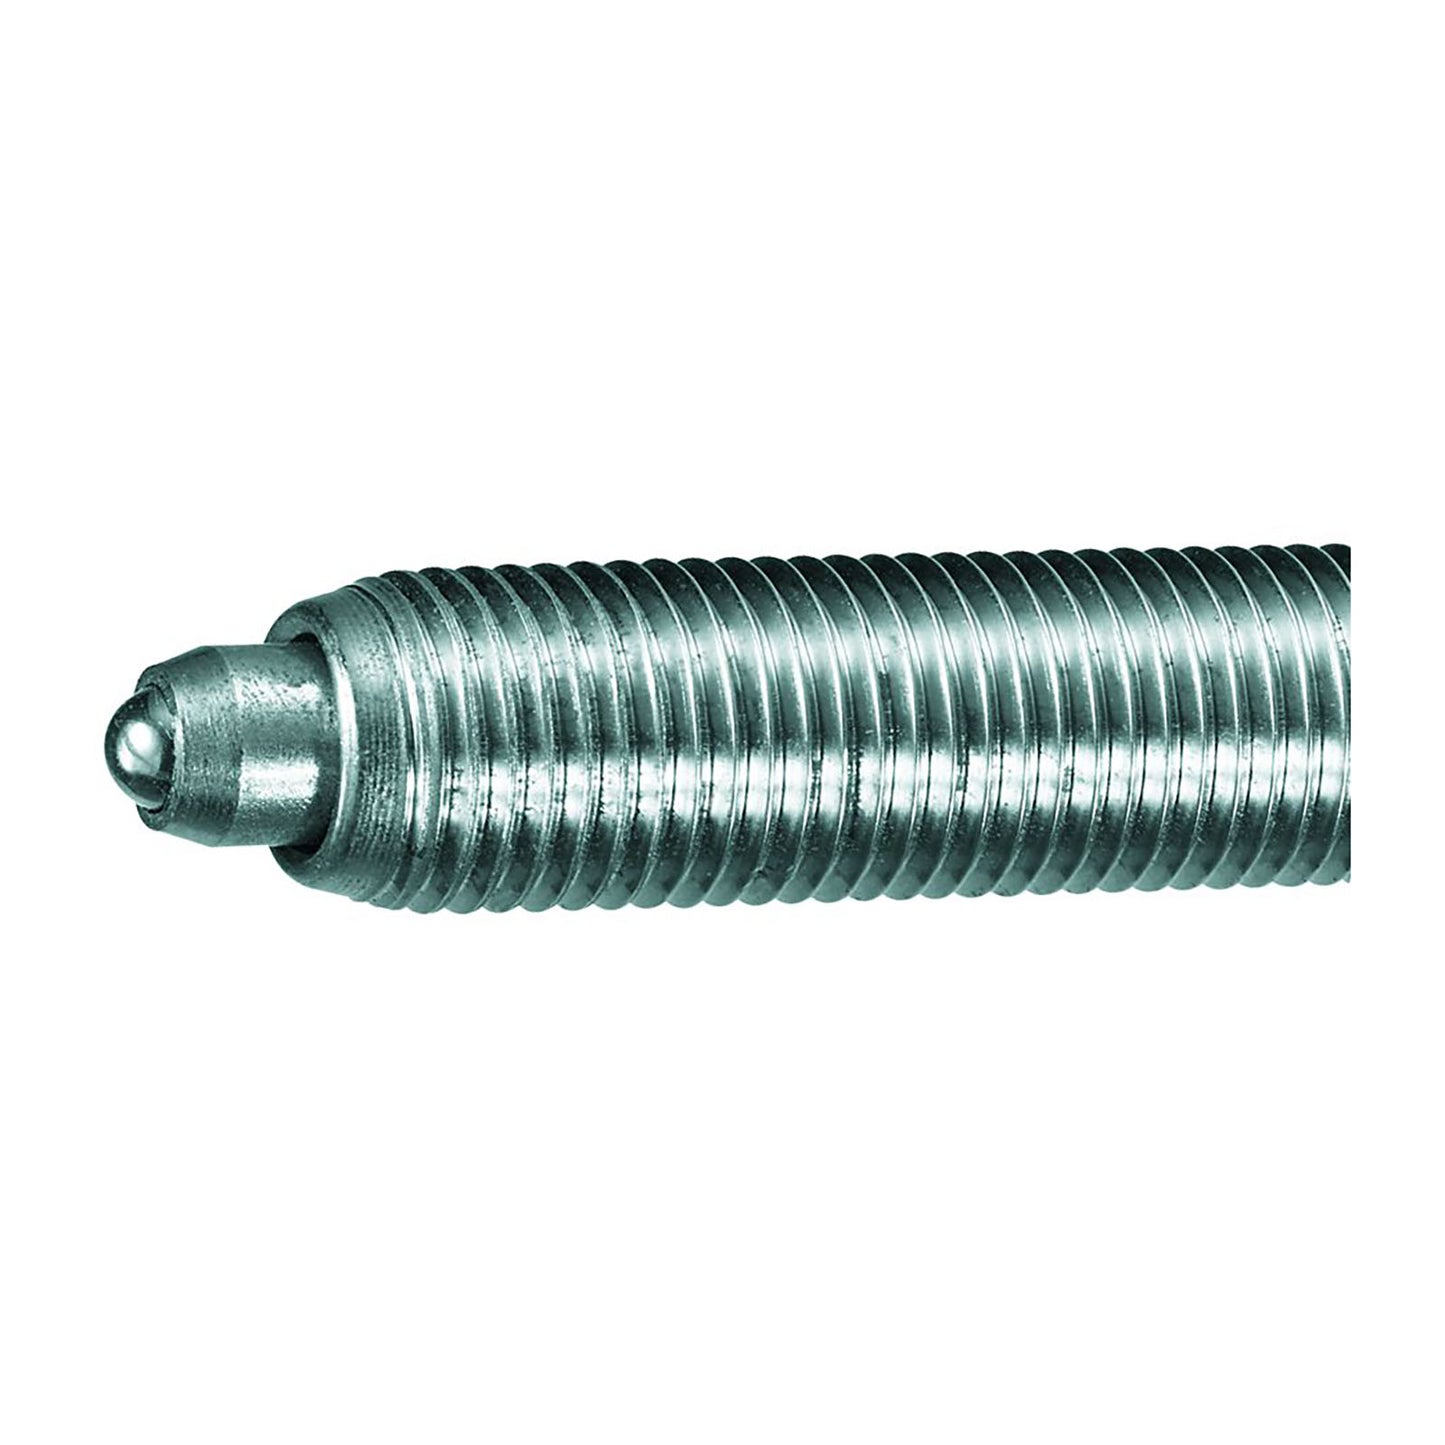 GEDORE 1.09/1 - TWIST+PULL Extractor 30x130mm (1748173)